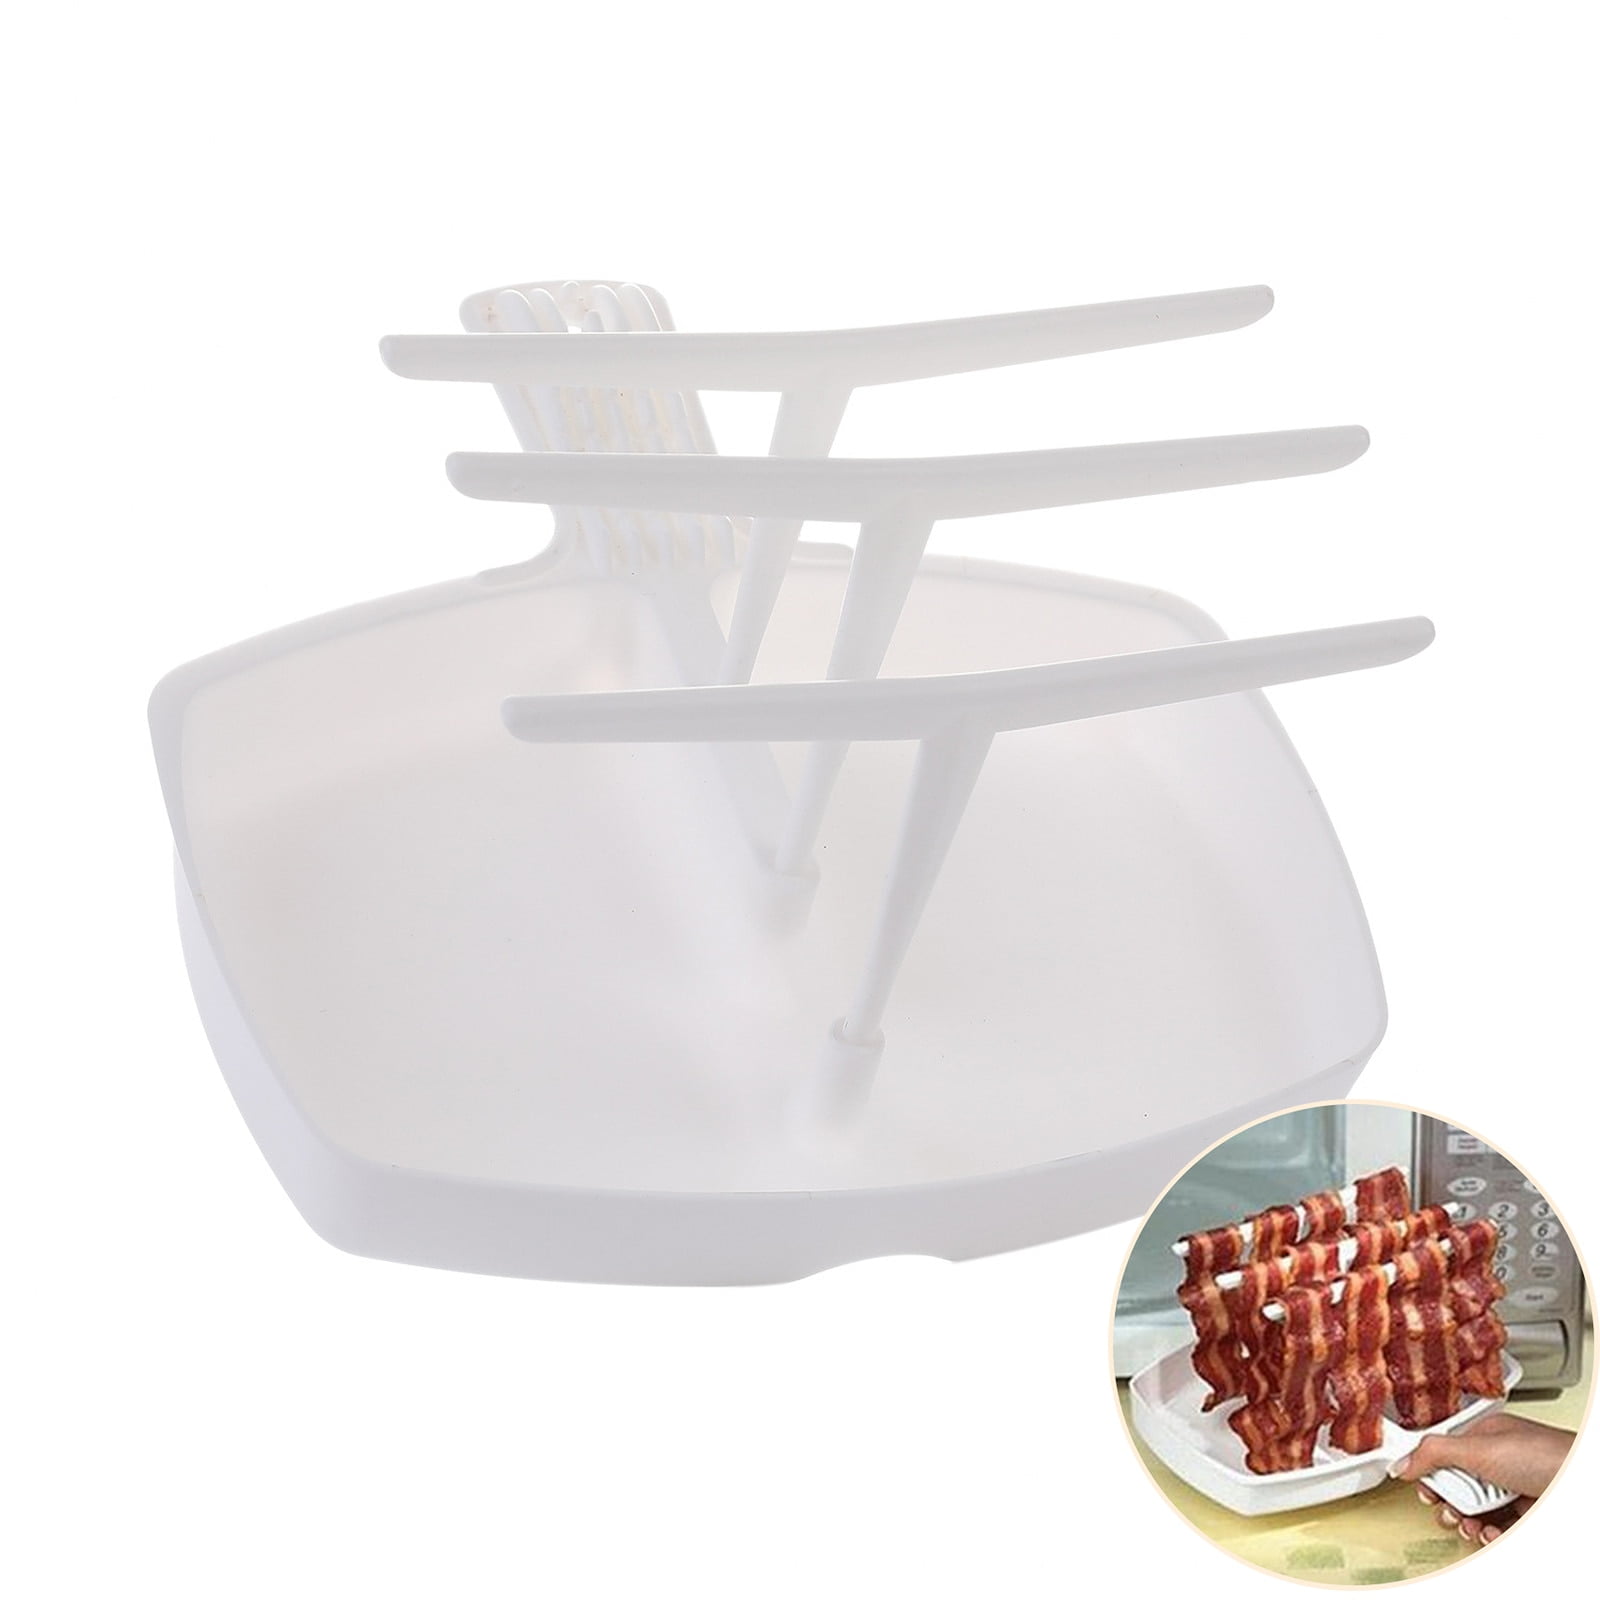 1pc Microwave Bacon Maker Microwavable Bacon Grill ,Bacon Tray, Pizza Tray,  Sauce Tray, Microwave Oven Cooker, Red White